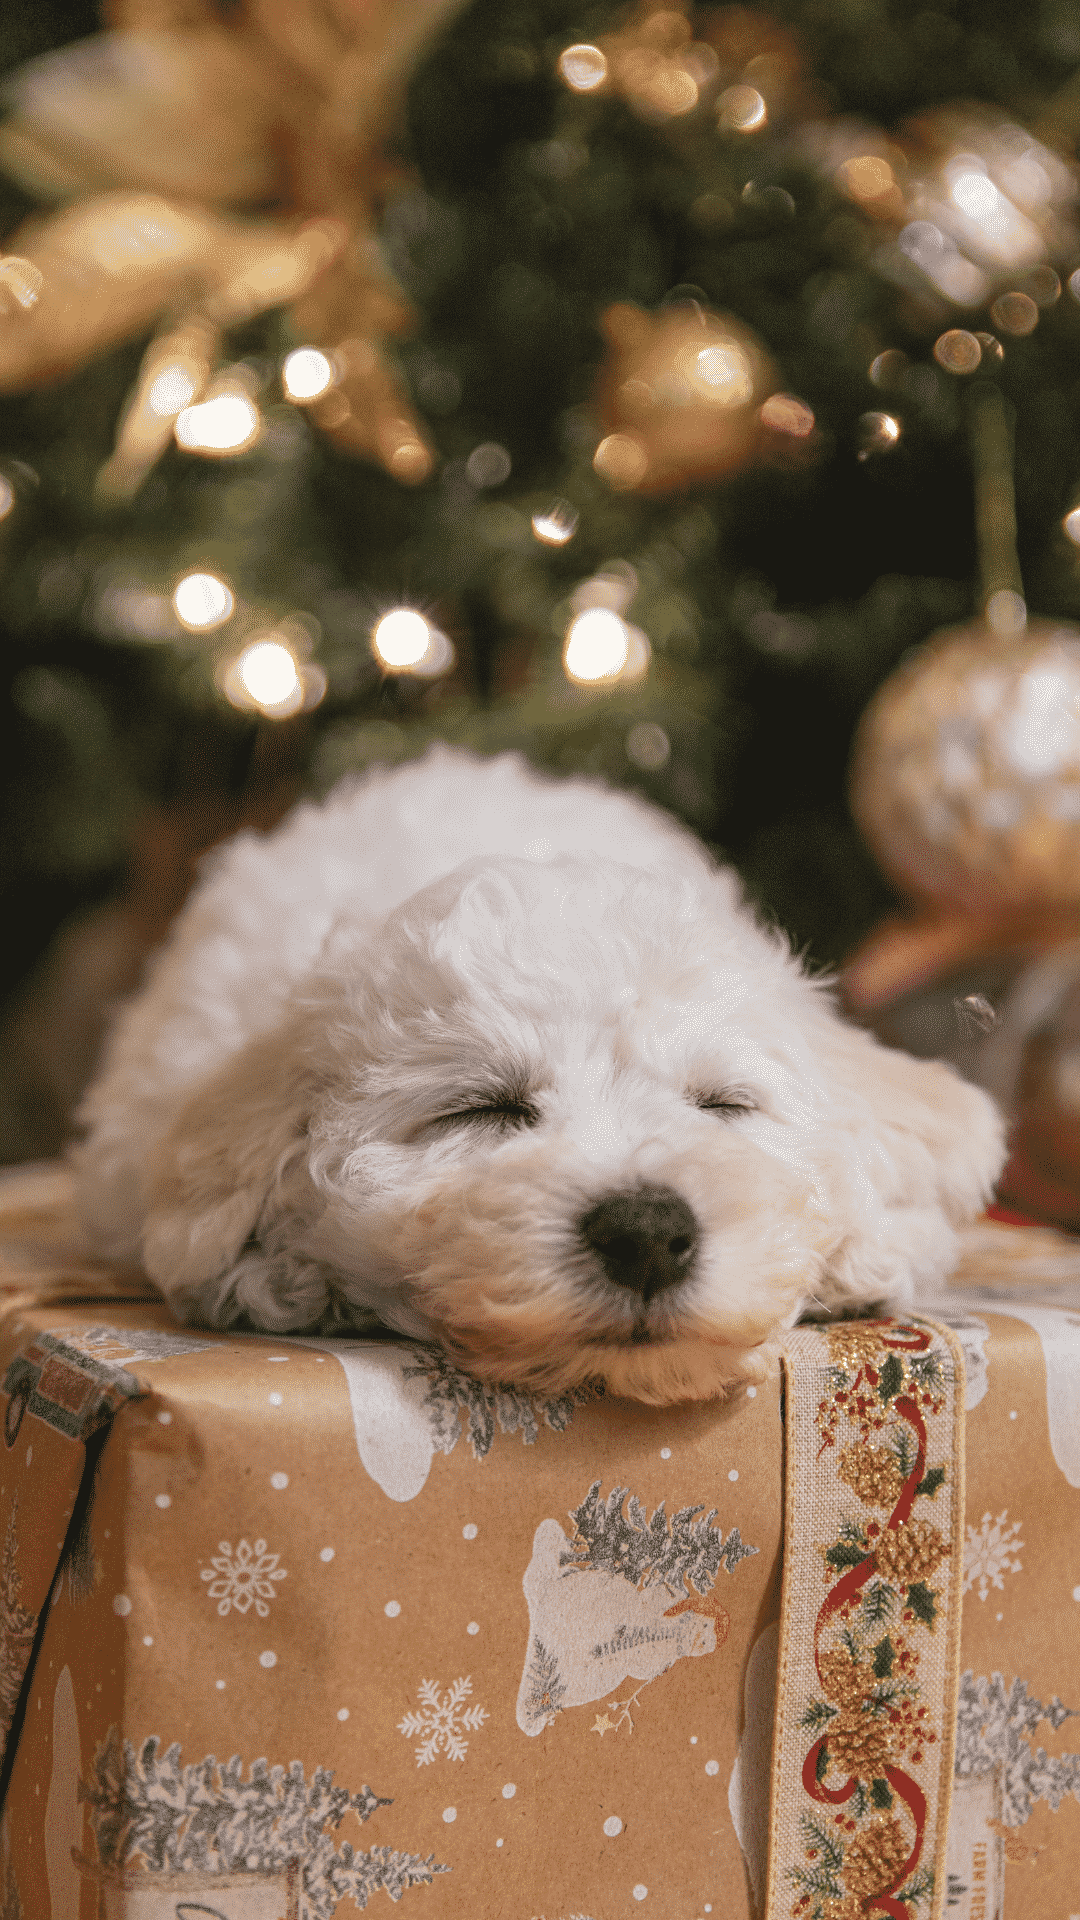 A small white dog sleeping on top of a present in front of a Christmas tree. - Cute Christmas